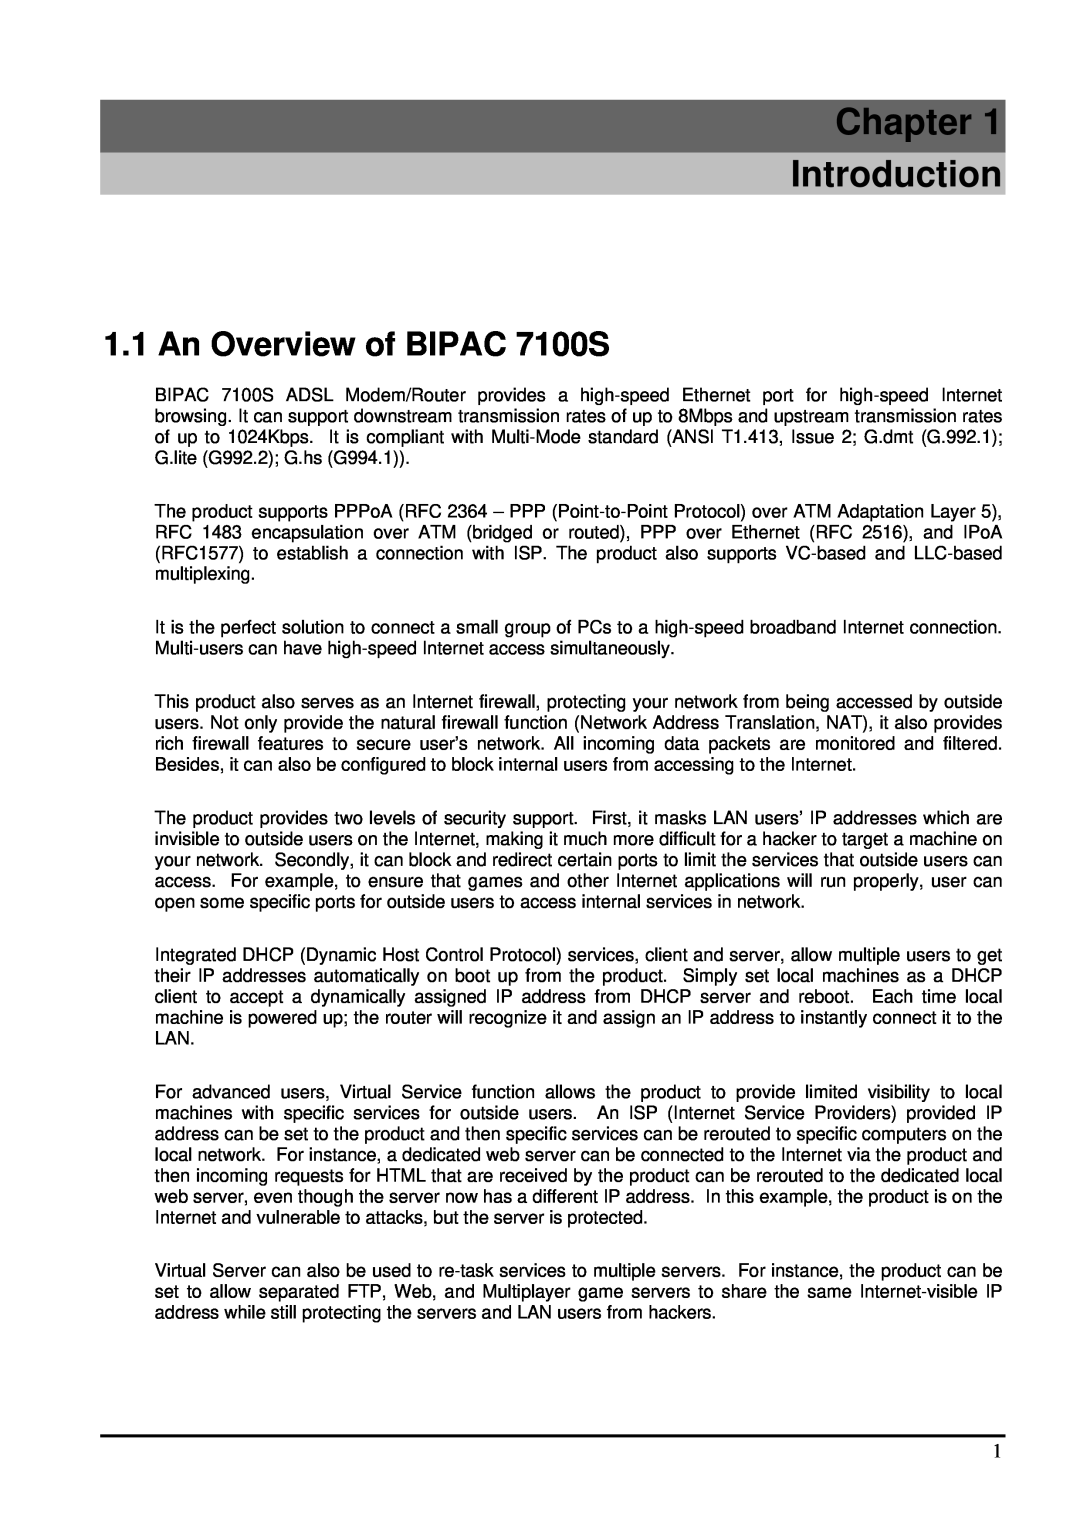 Billion Electric Company user manual Chapter Introduction, An Overview of BIPAC 7100S 